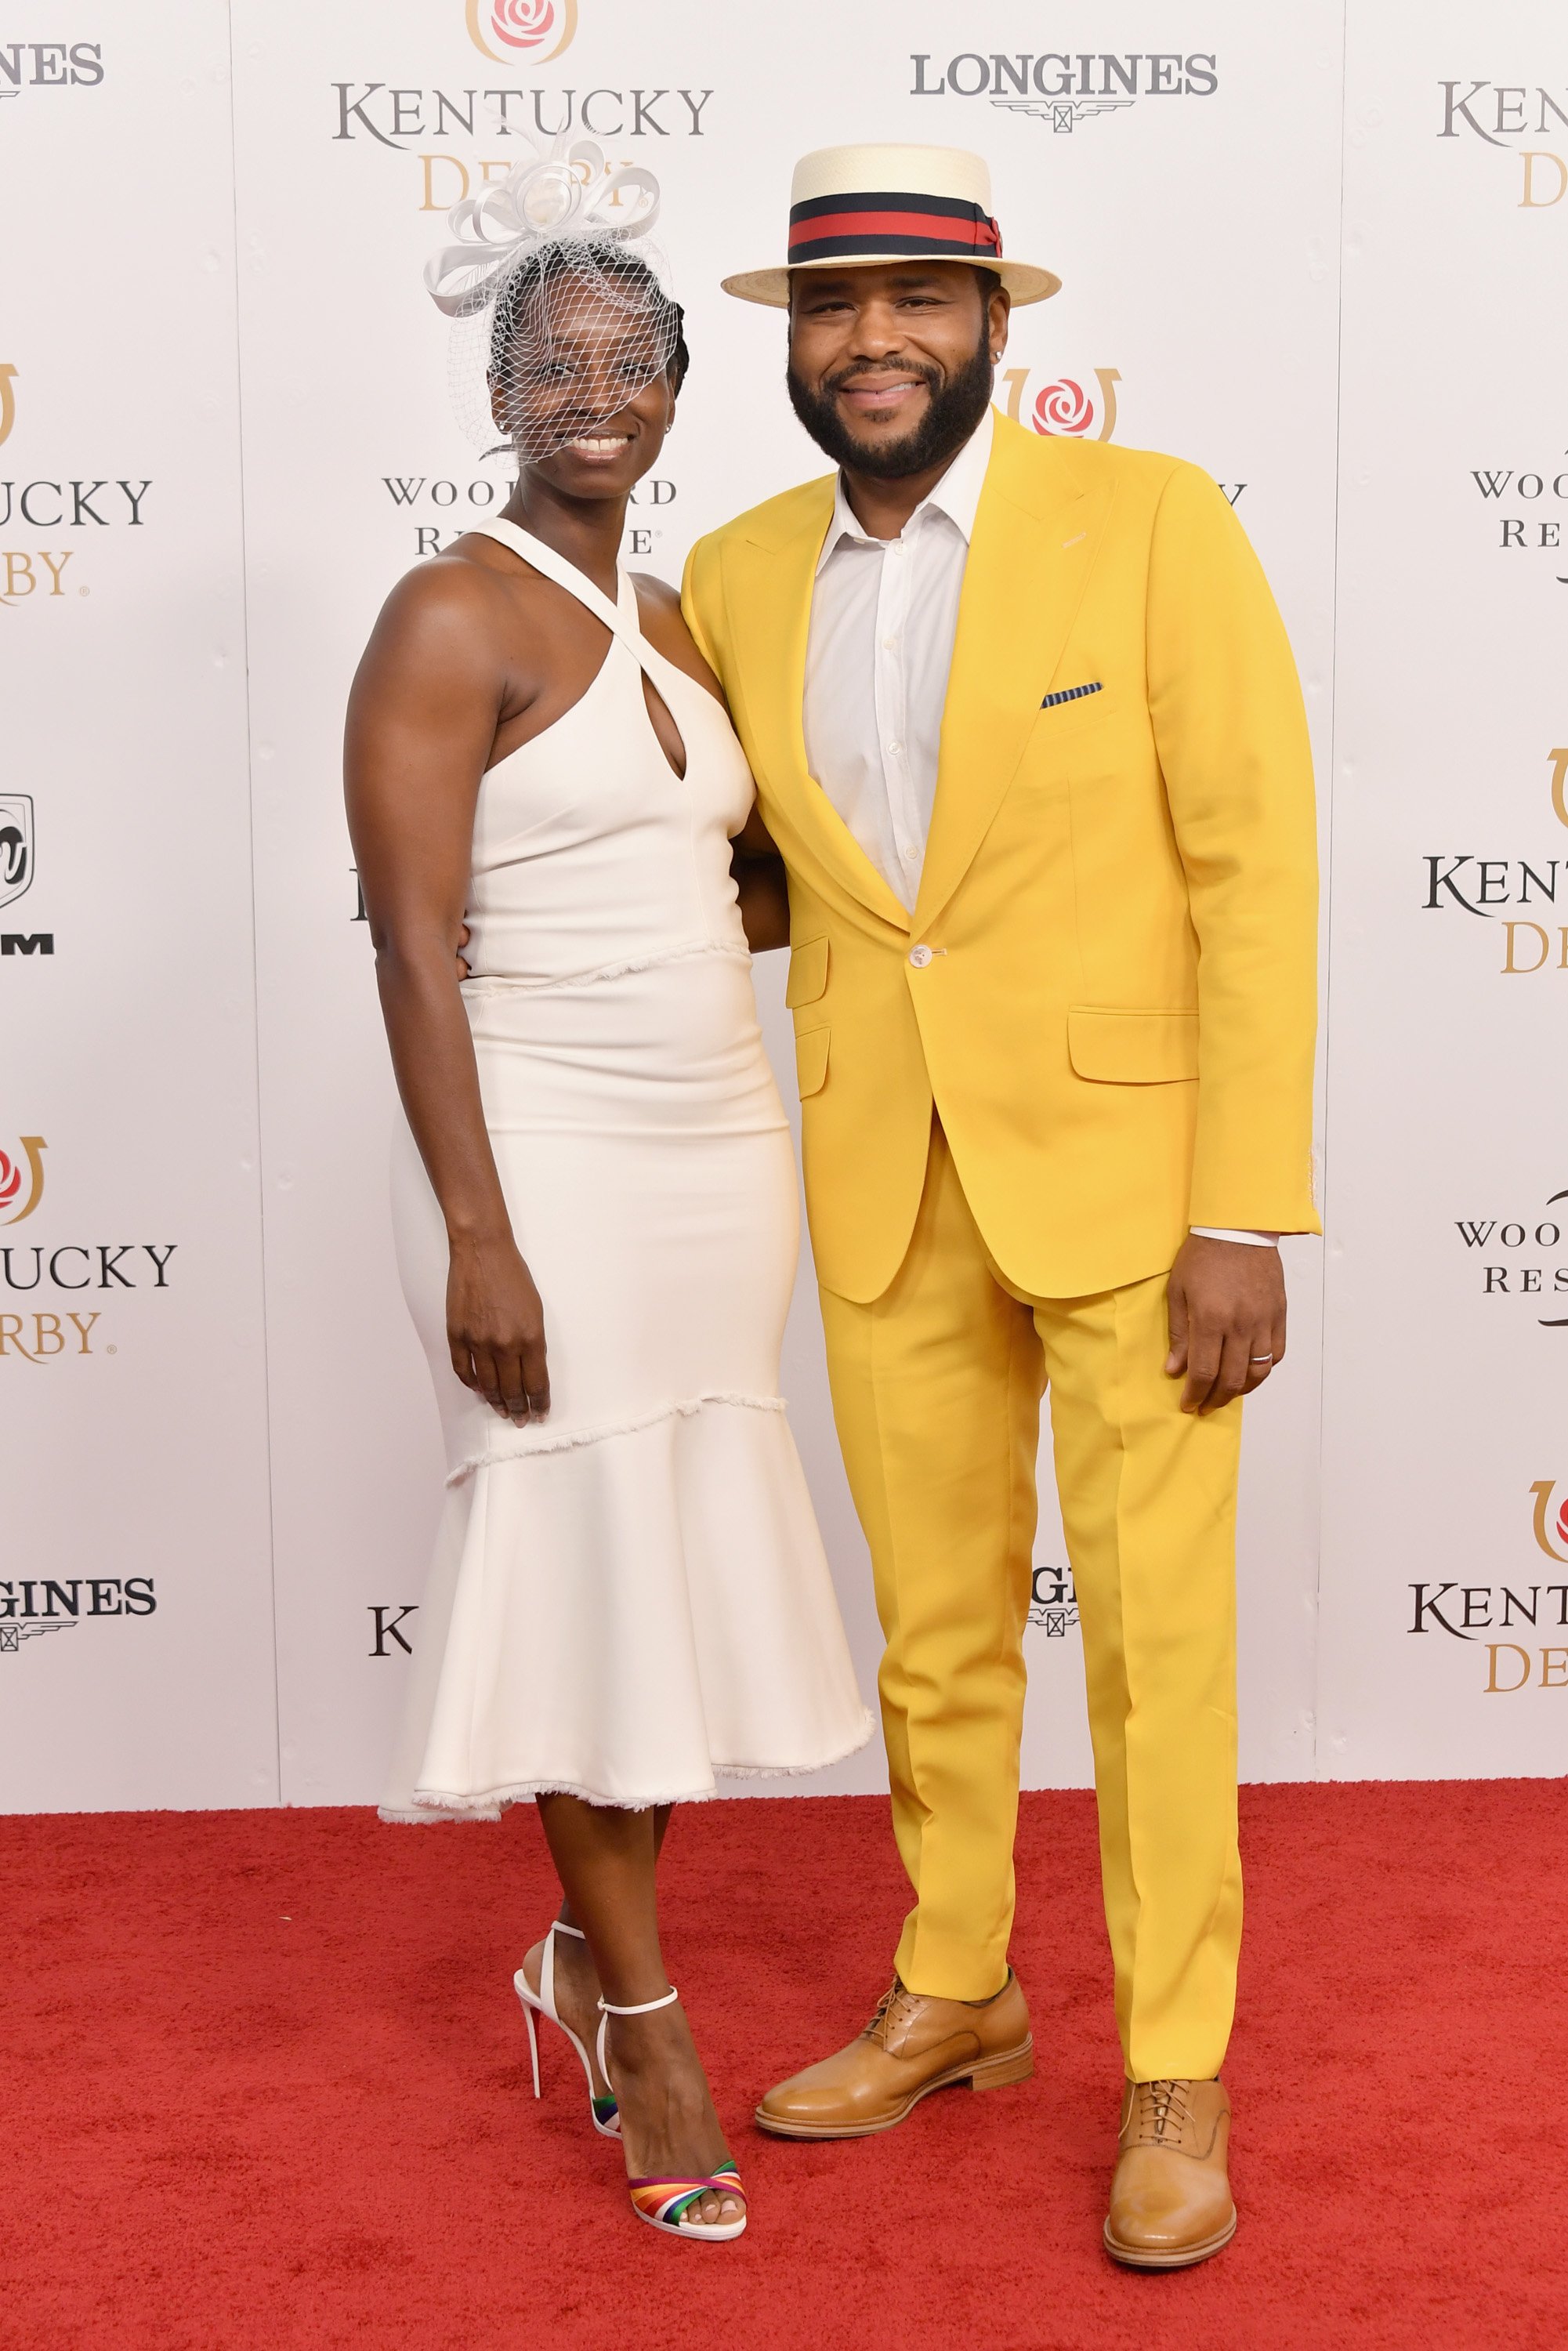  Anthony Anderson and his wife Alvina Stewart at the Kentucky Derby 144 on May 5, 2018 in Louisville, Kentucky. | Photo: Getty Images